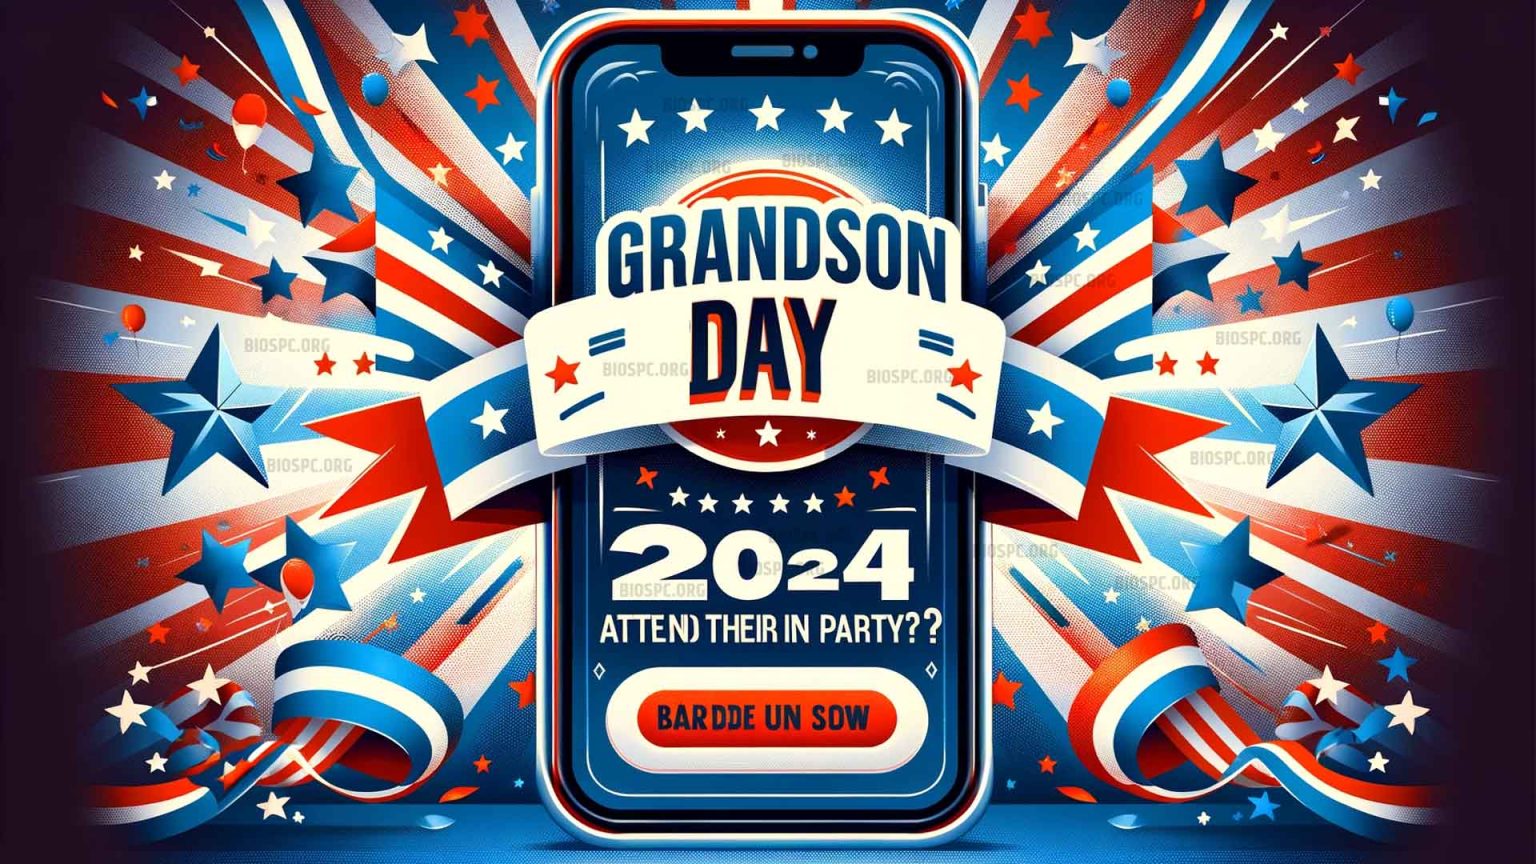 Grandson Day 2024 Attend Their Party in the USA in 2024?